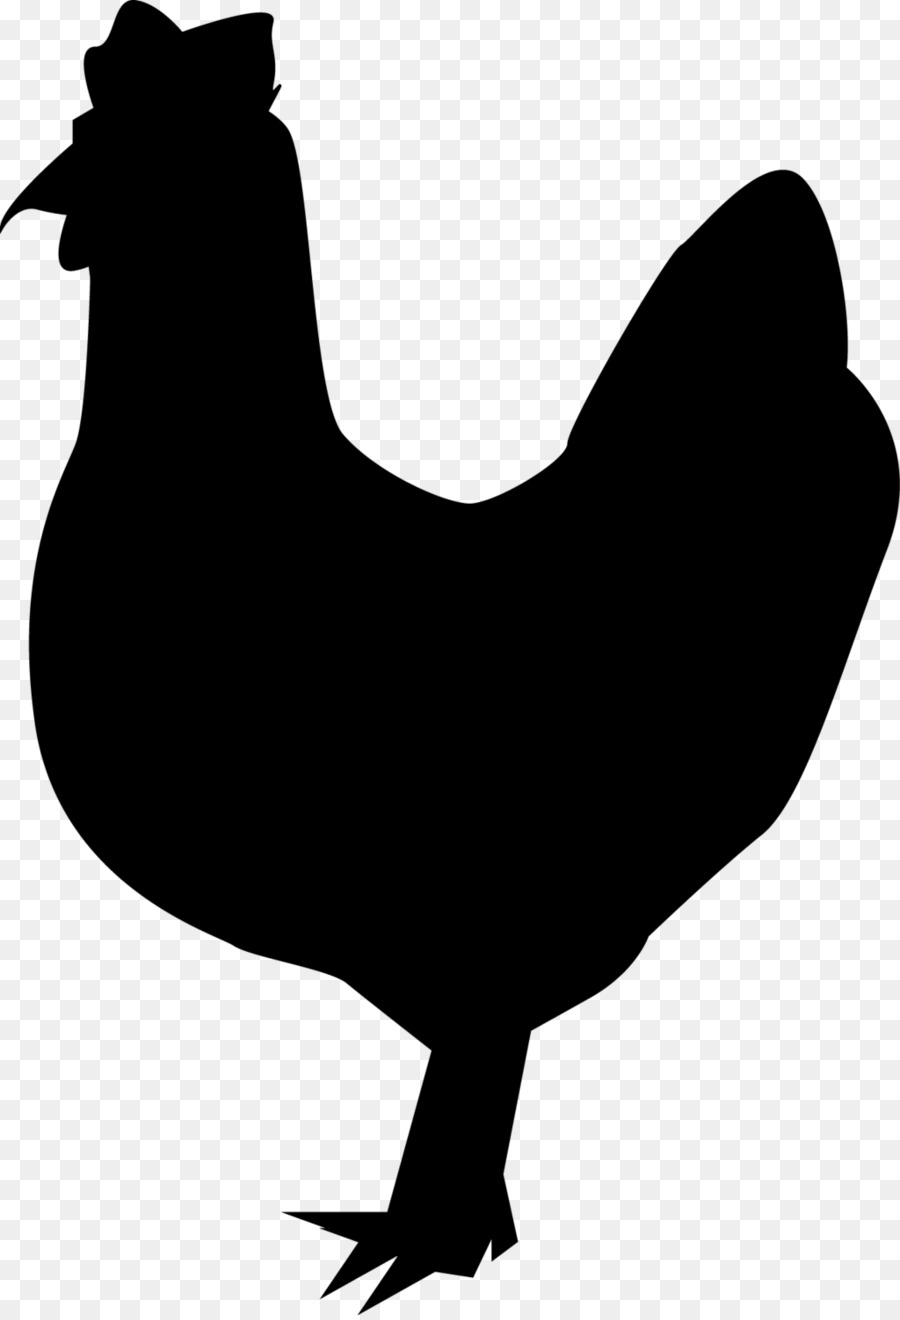 Chicken Silhouette Photography Clip art - chicken png download - 1024*1496 - Free Transparent Chicken png Download.